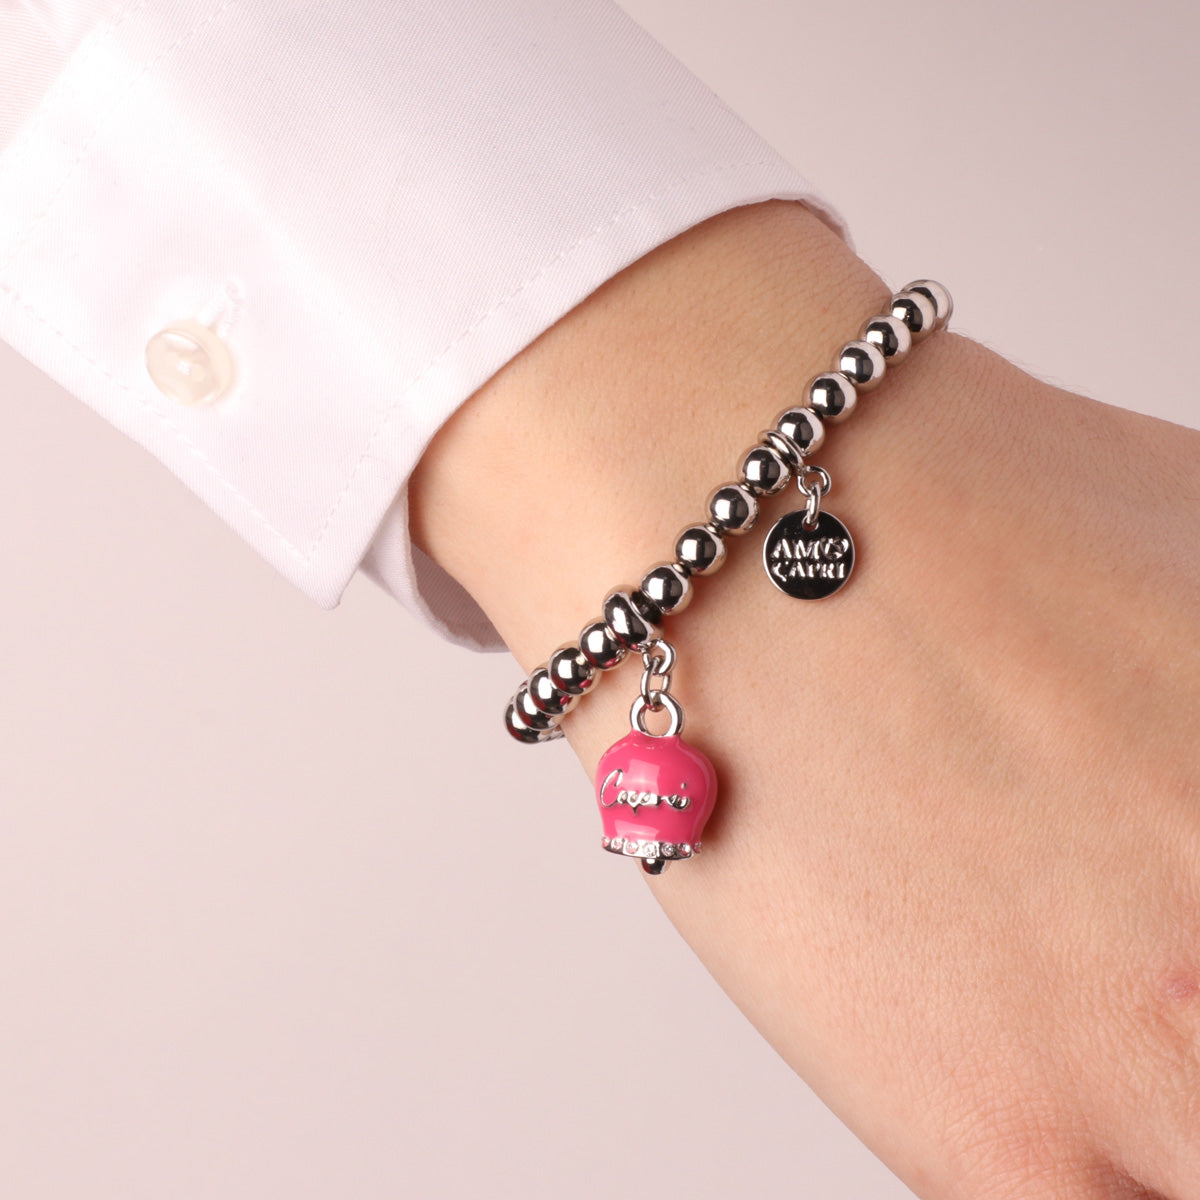 Metal bracelet with fuchsia bell, with Capri writing and white crystals